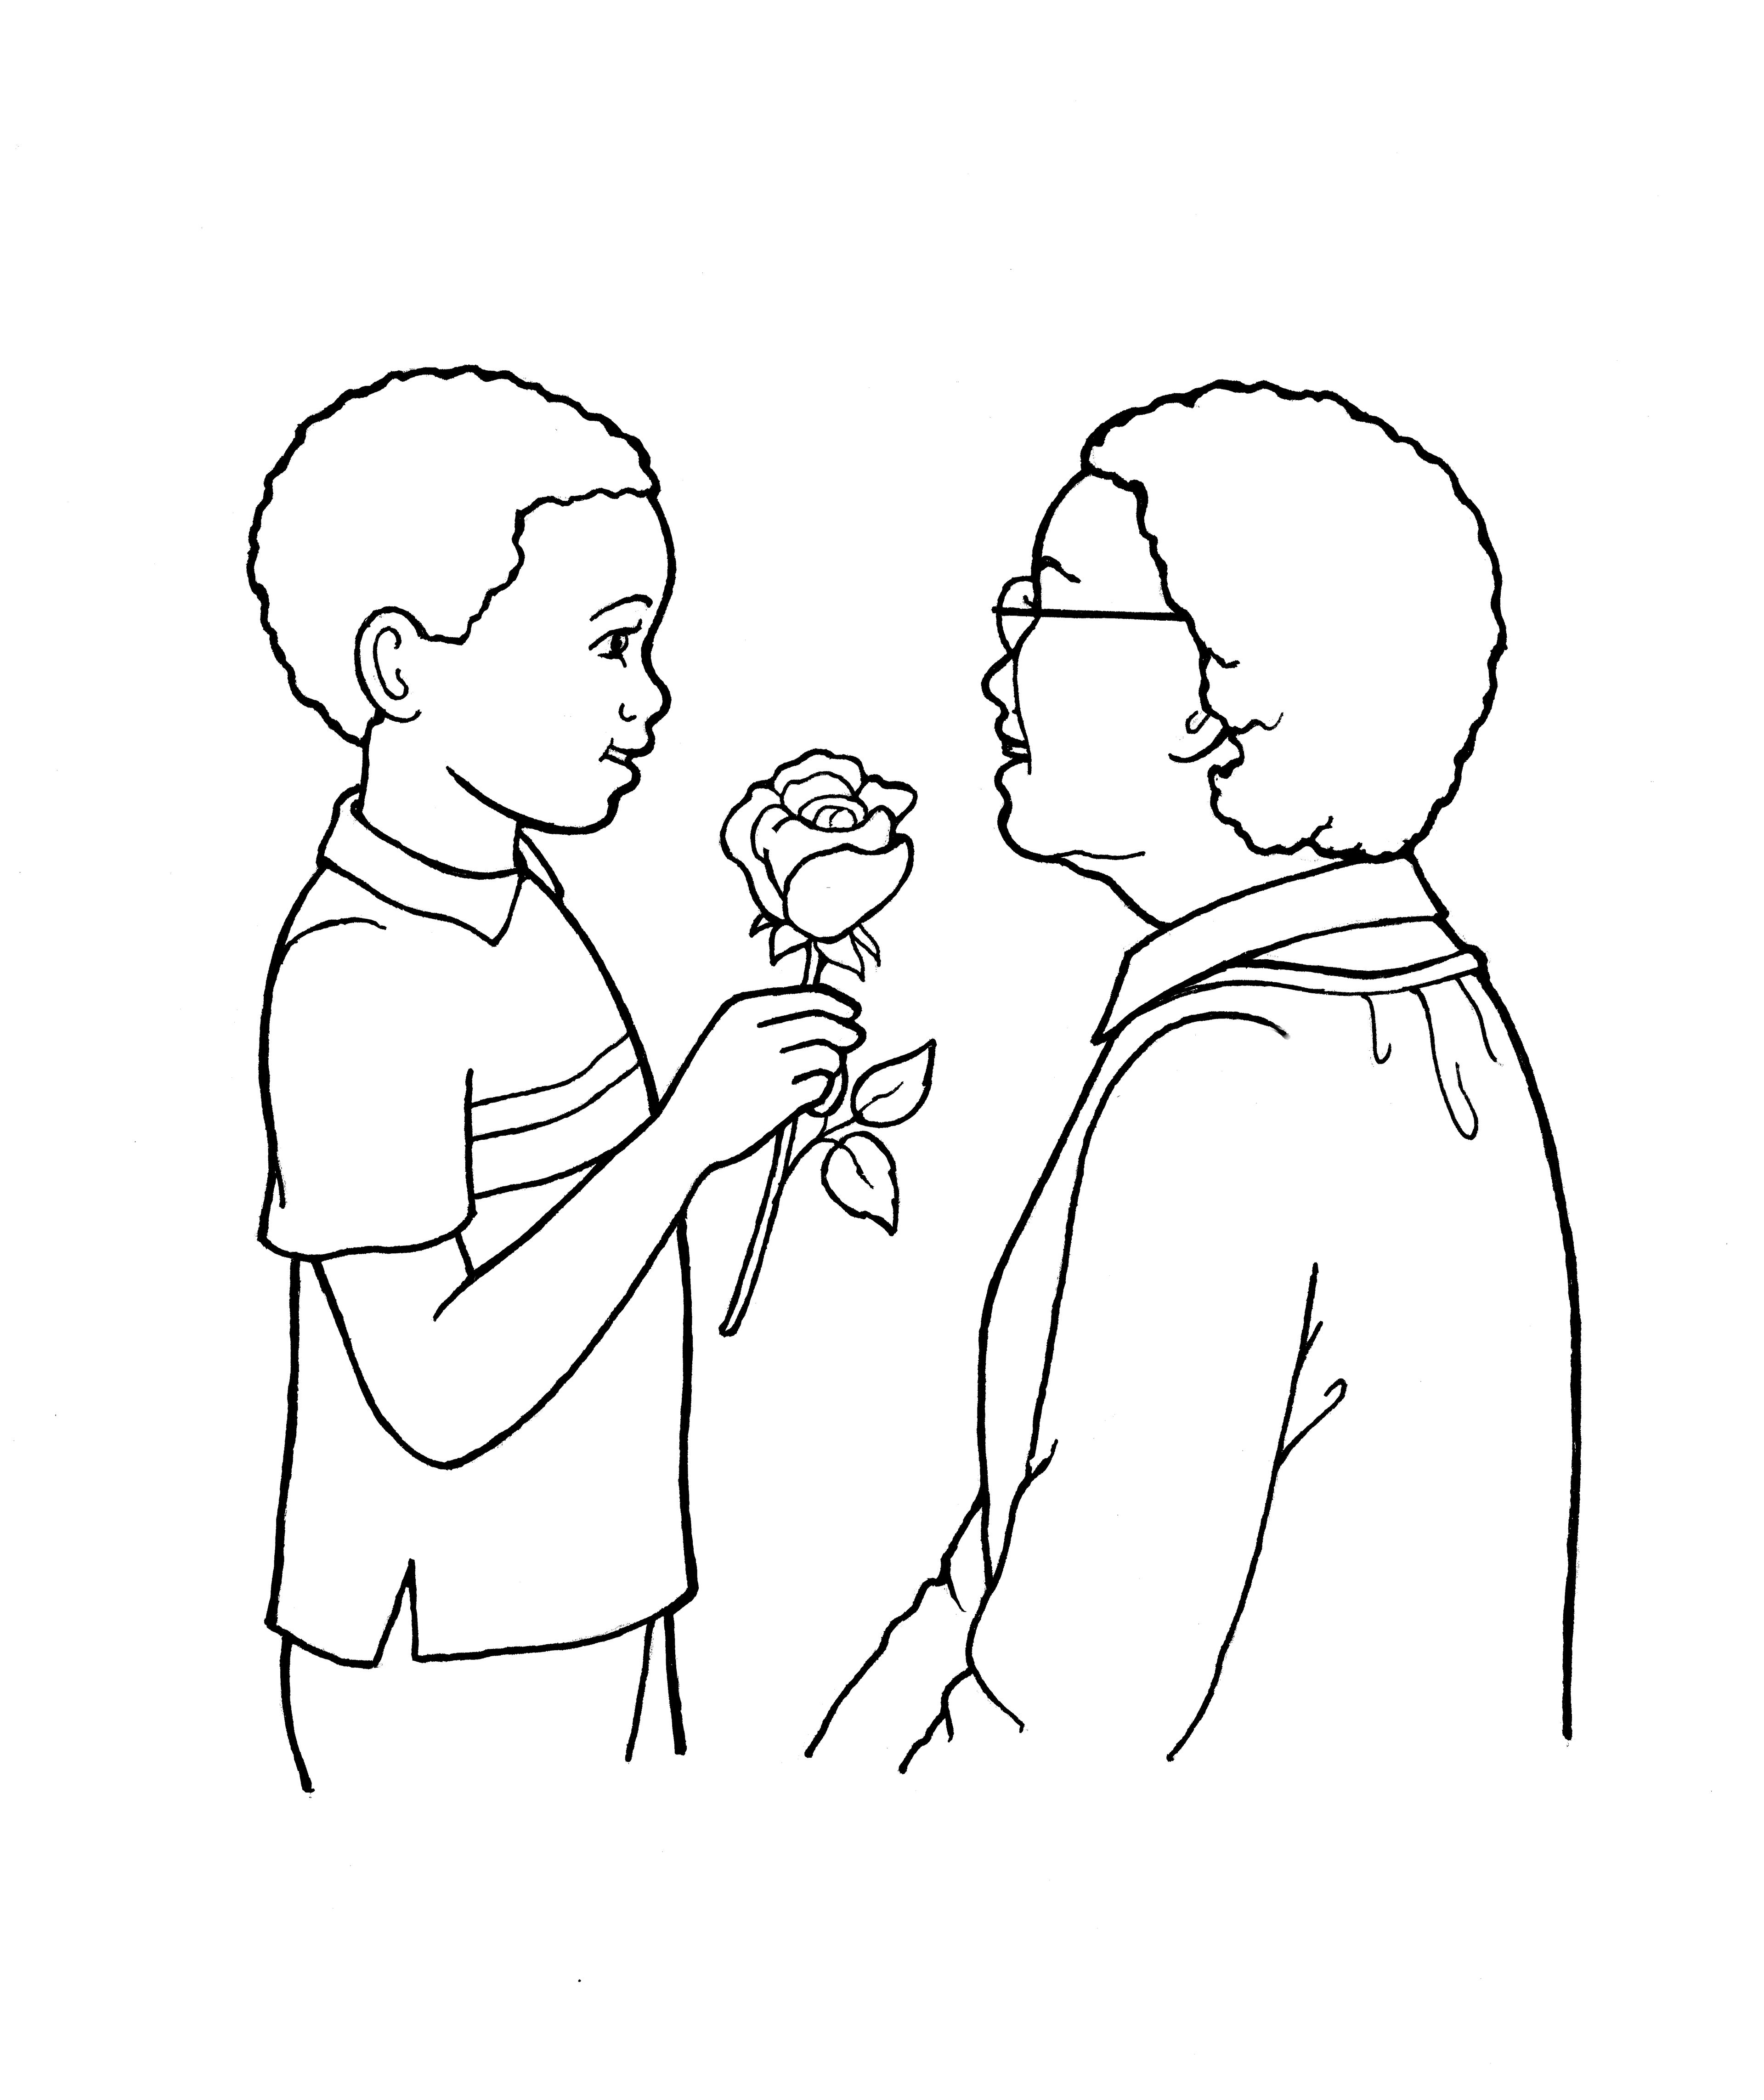 An illustration of a boy giving a rose to an older woman.